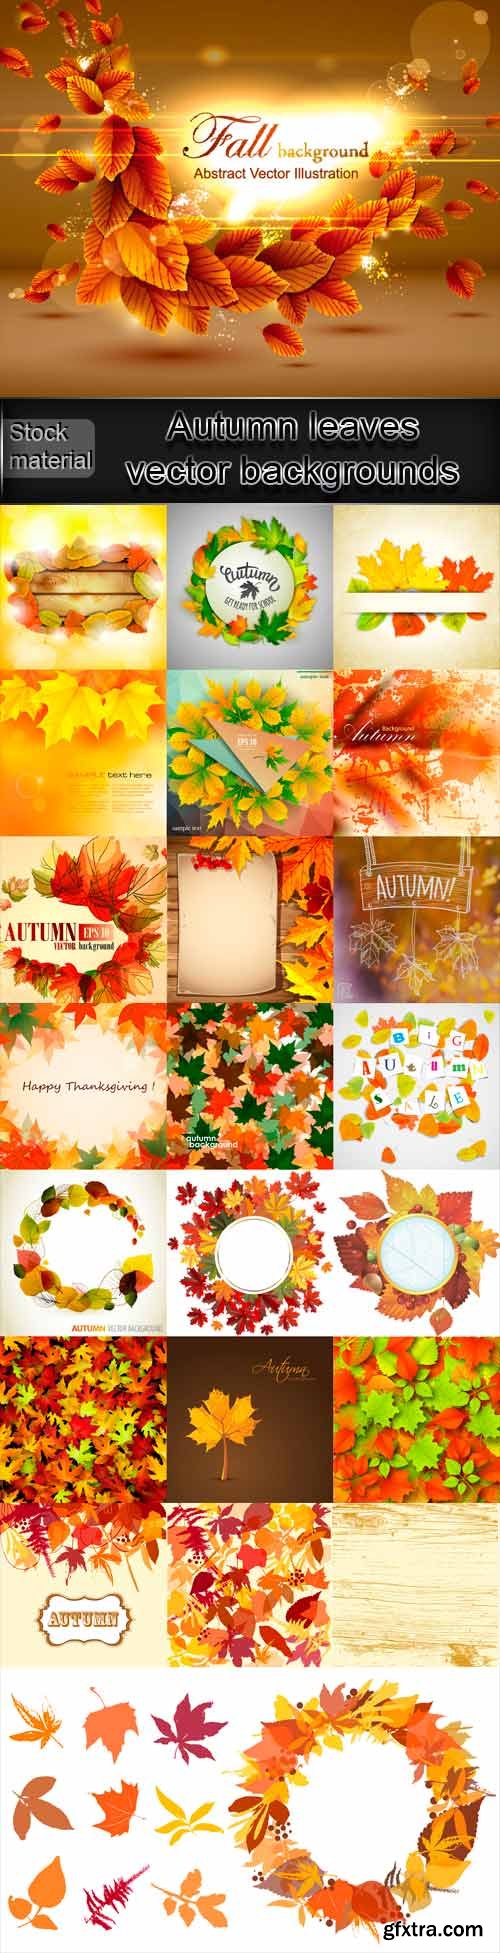 Autumn leaves vector backgrounds